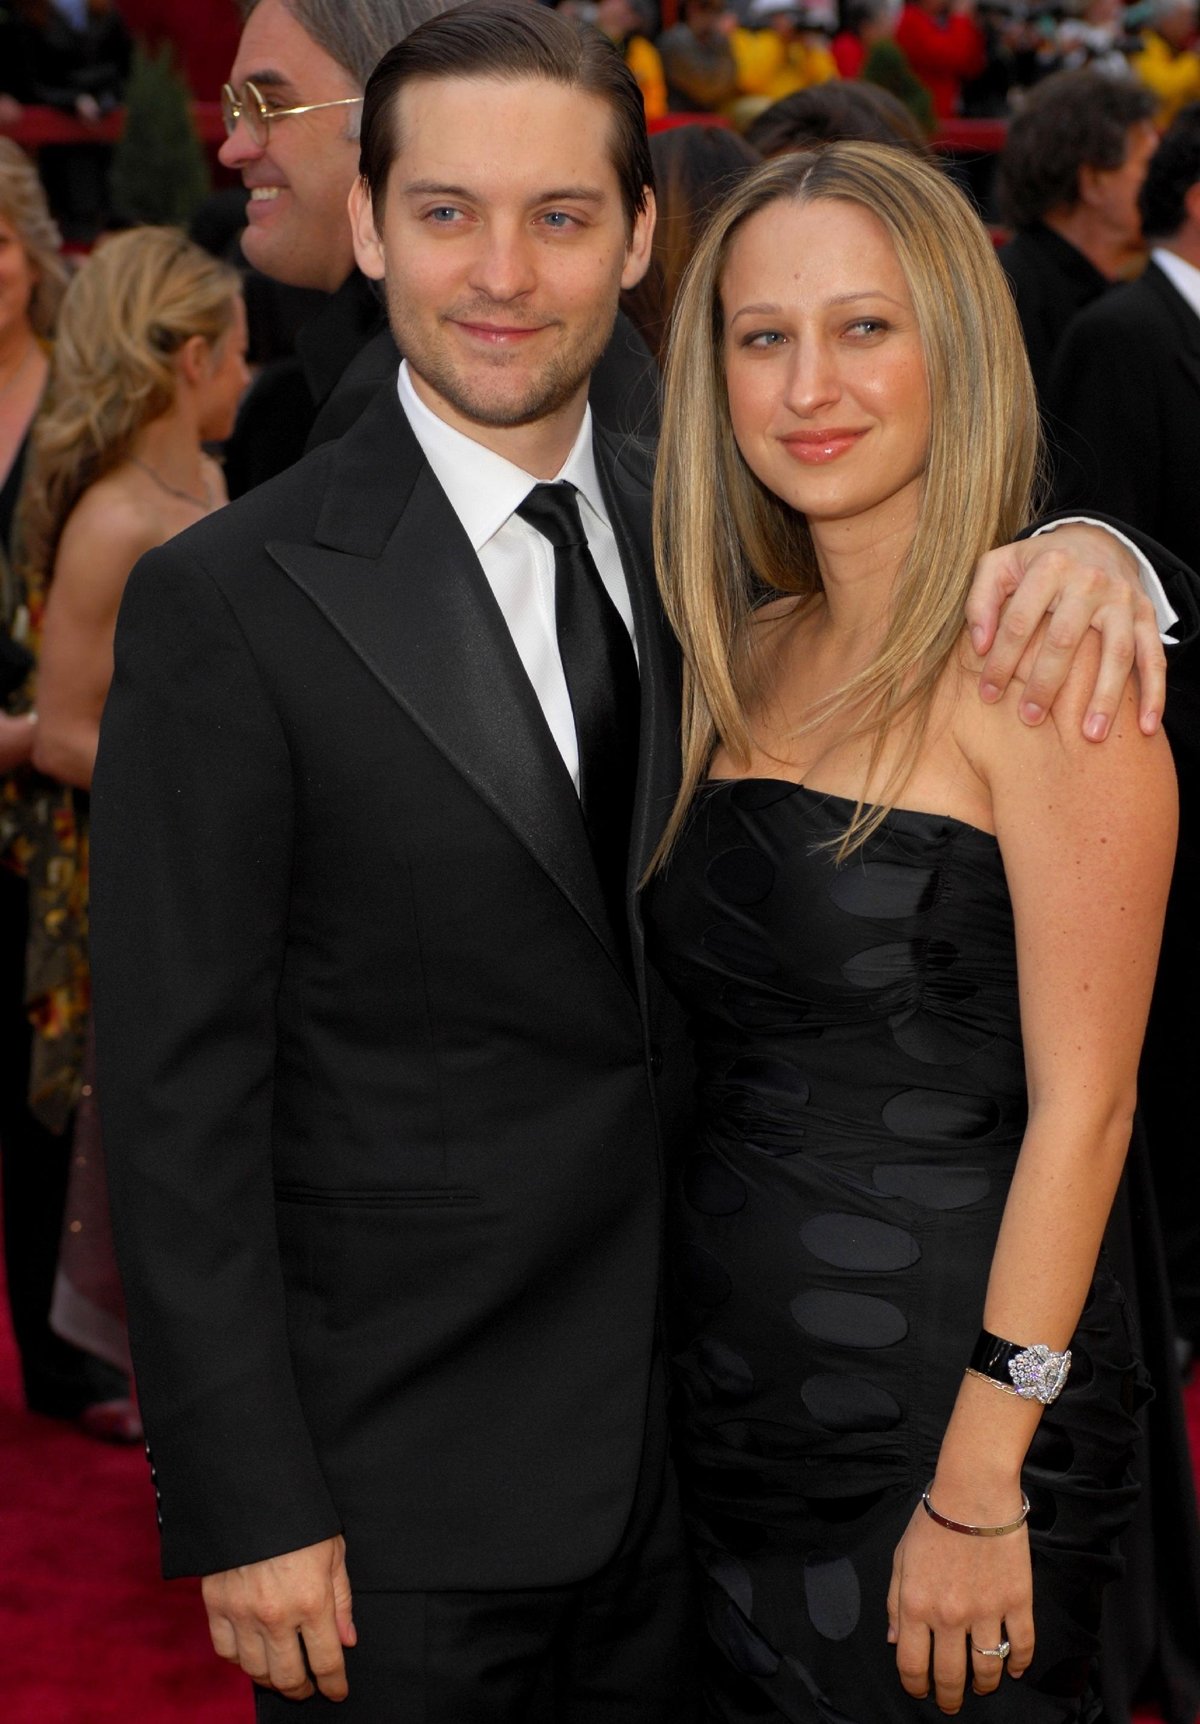 American actor and film producer Tobey Maguire and jewelry designer Jennifer Meyer filed for divorce in October 2020